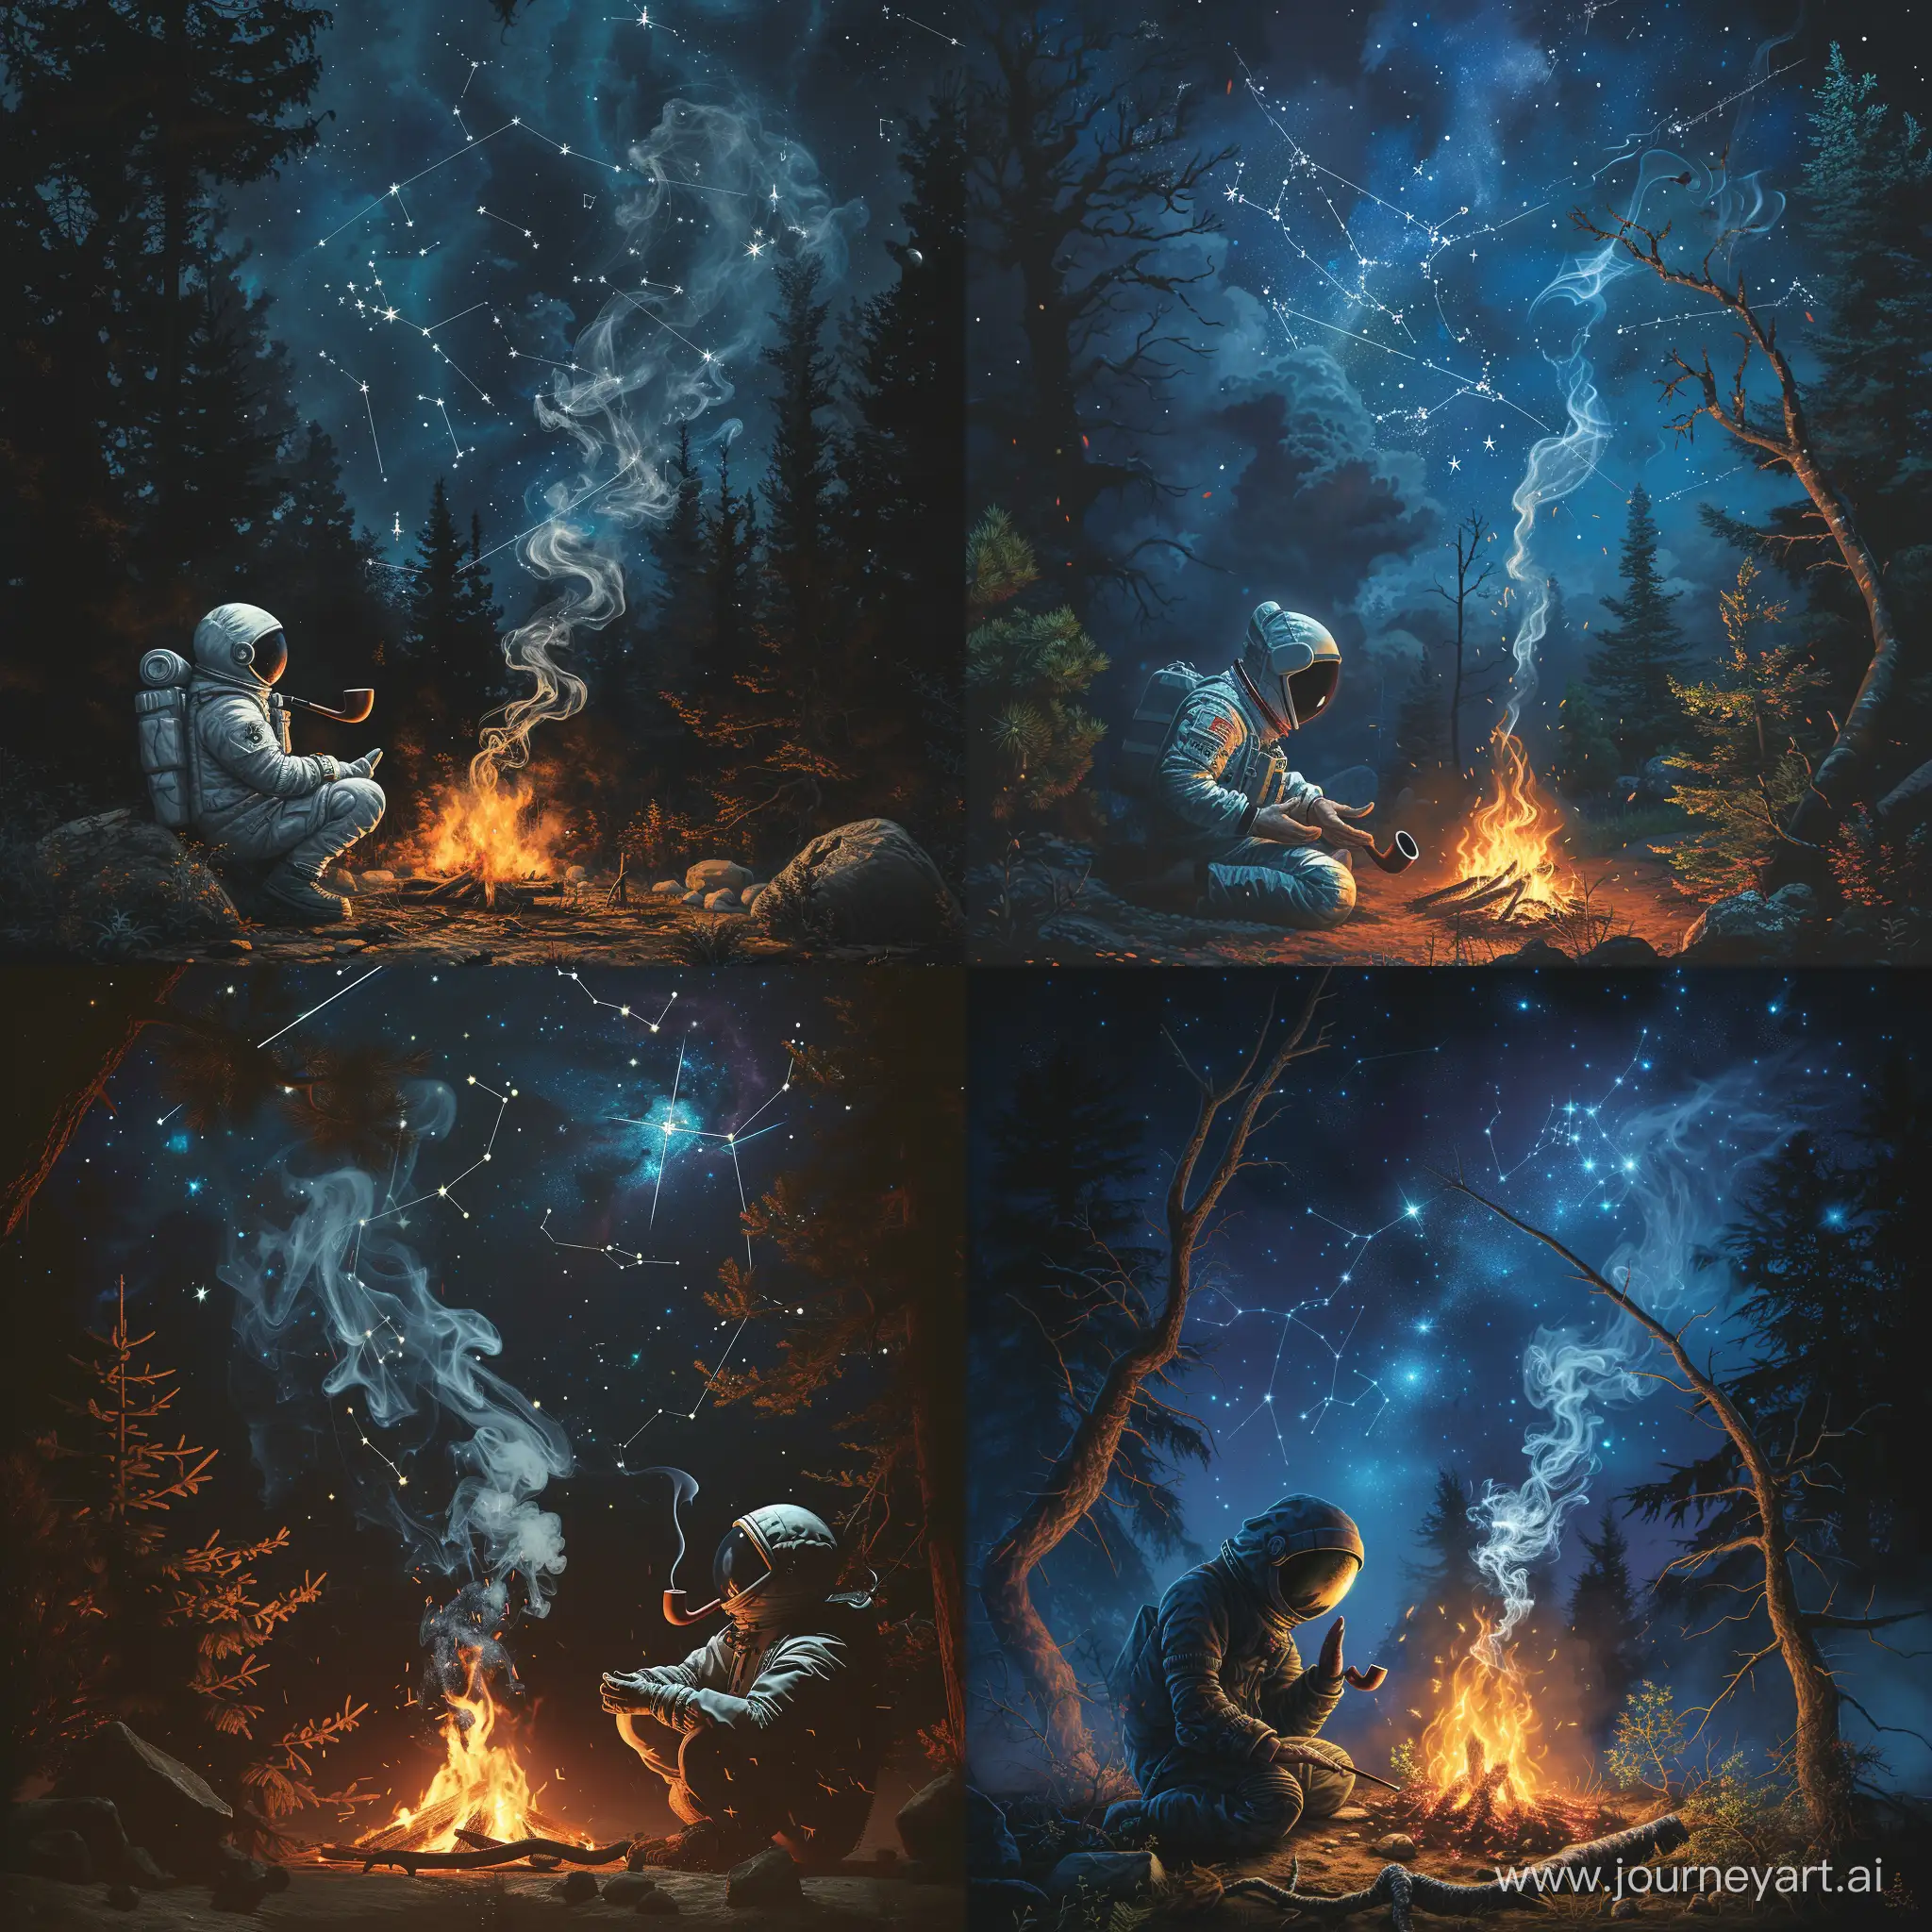 Solitary-Cosmonaut-Praying-by-Bonfire-in-Enchanted-Forest-Under-Starry-Night